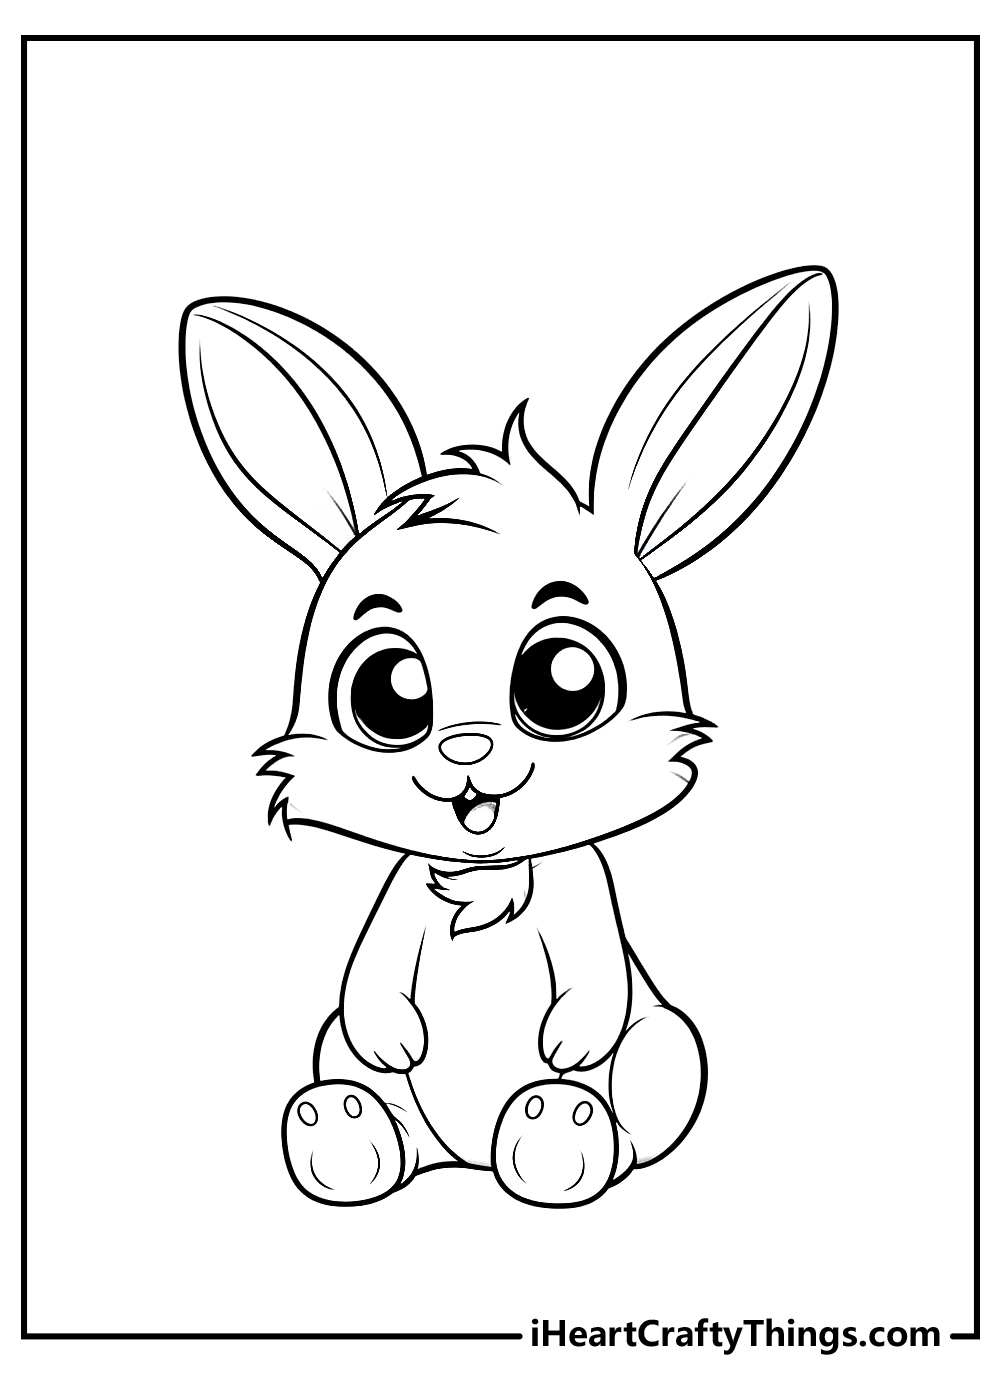 Rabbit coloring pages free printables